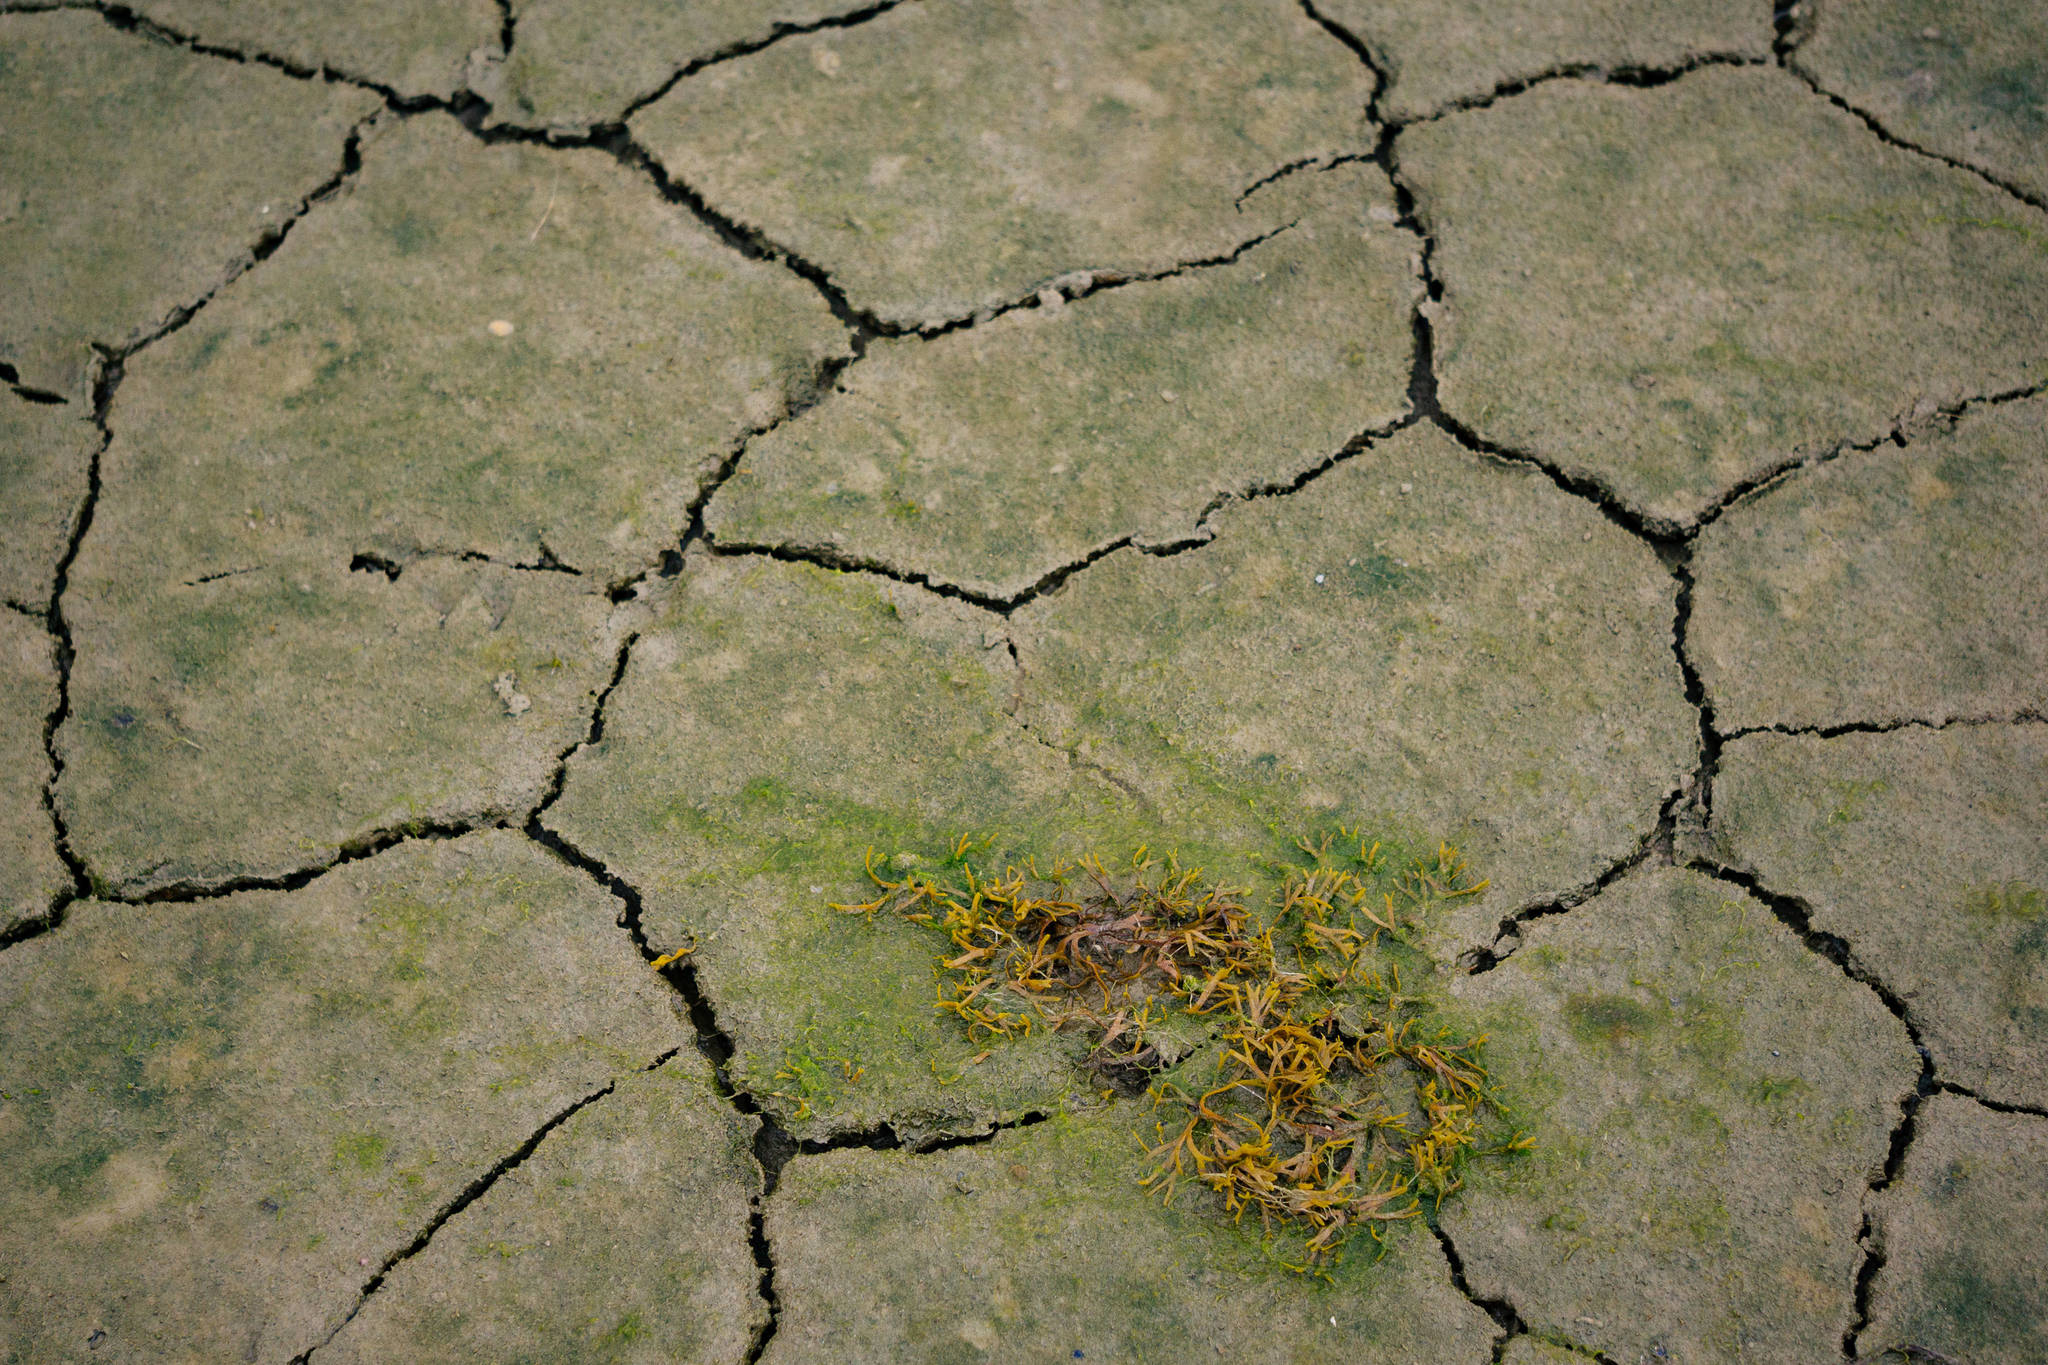 Cracked, segmented mud create geometric shapes in the ground. (Photo by Gabe Donohoe)